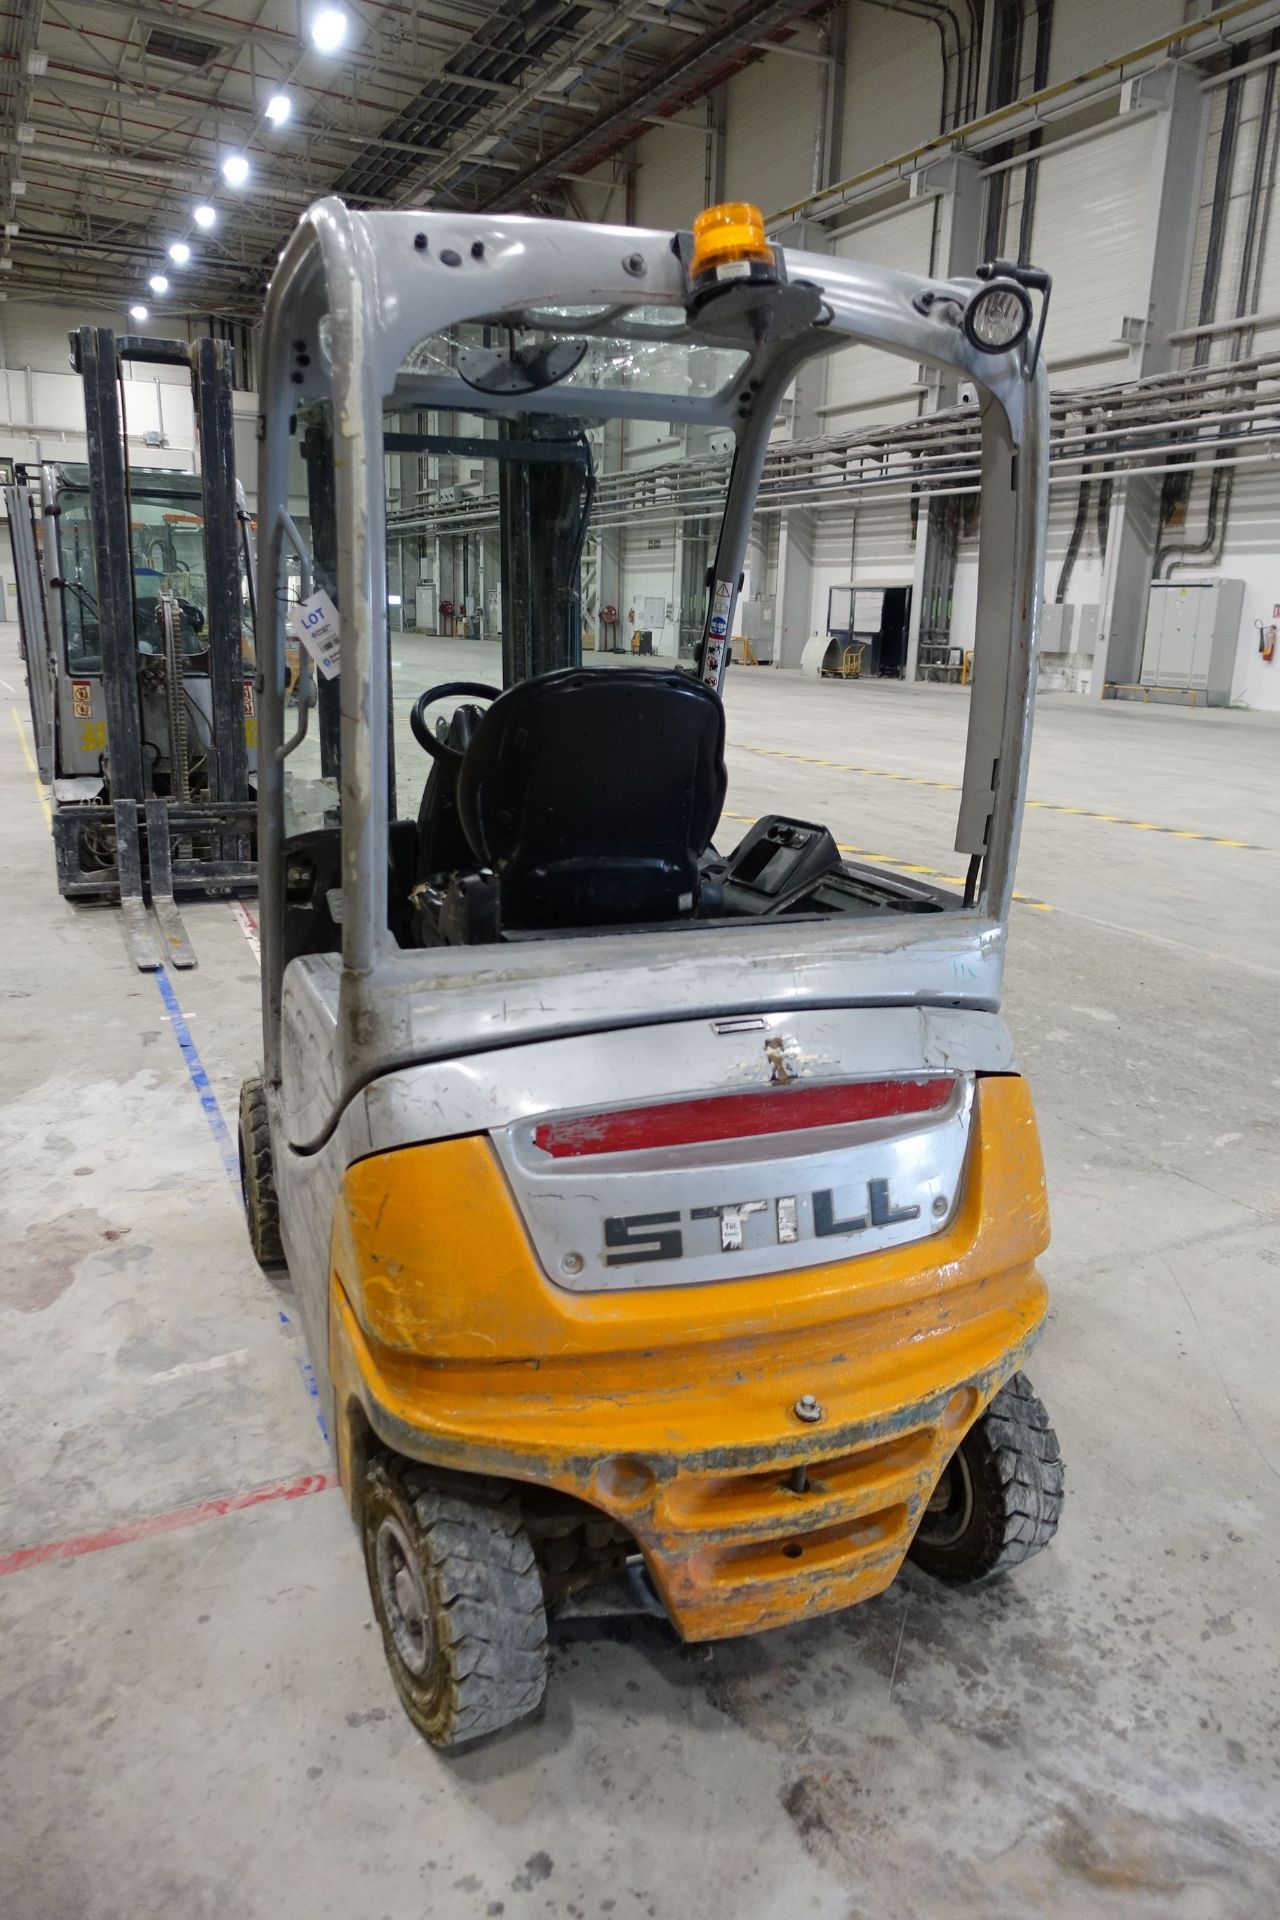 STILL RX20-20P Electric Forklift Truck, 2,000kg Capacity with Sideshift, Ser # 516216H00371 (2017) - Image 3 of 42